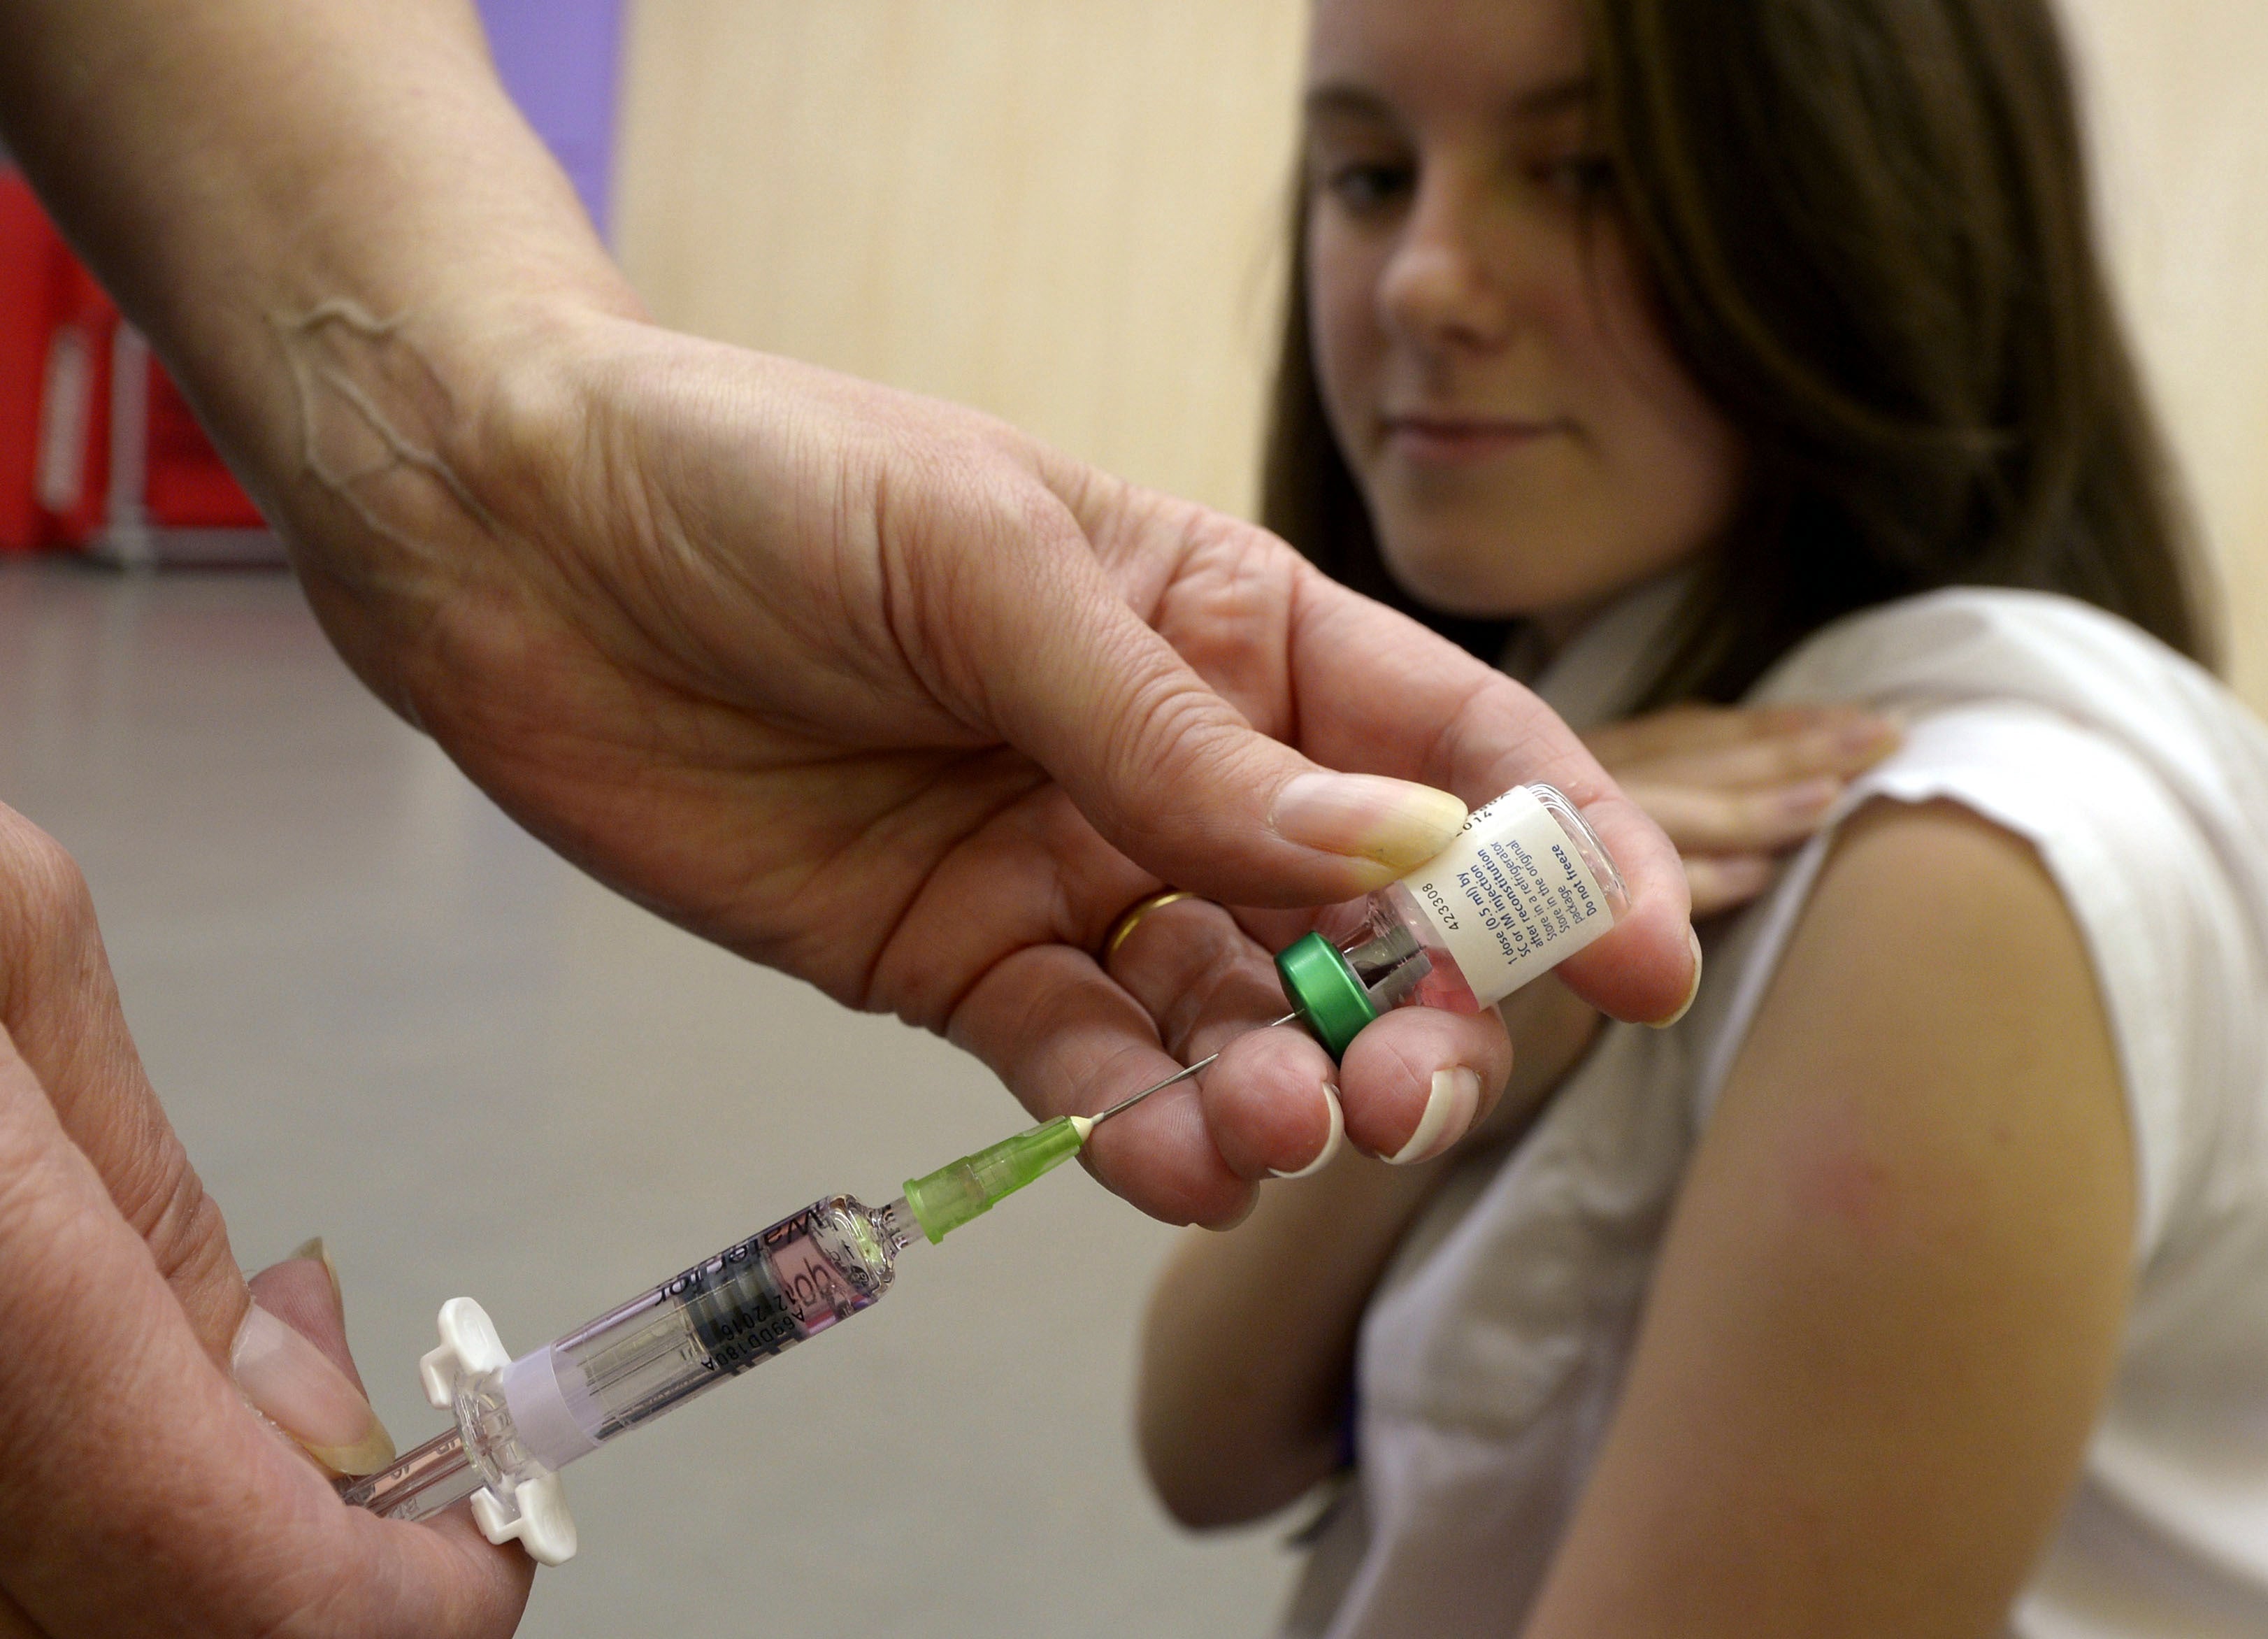 mapped: measles cases are surging across england - here’s where’s worst affected